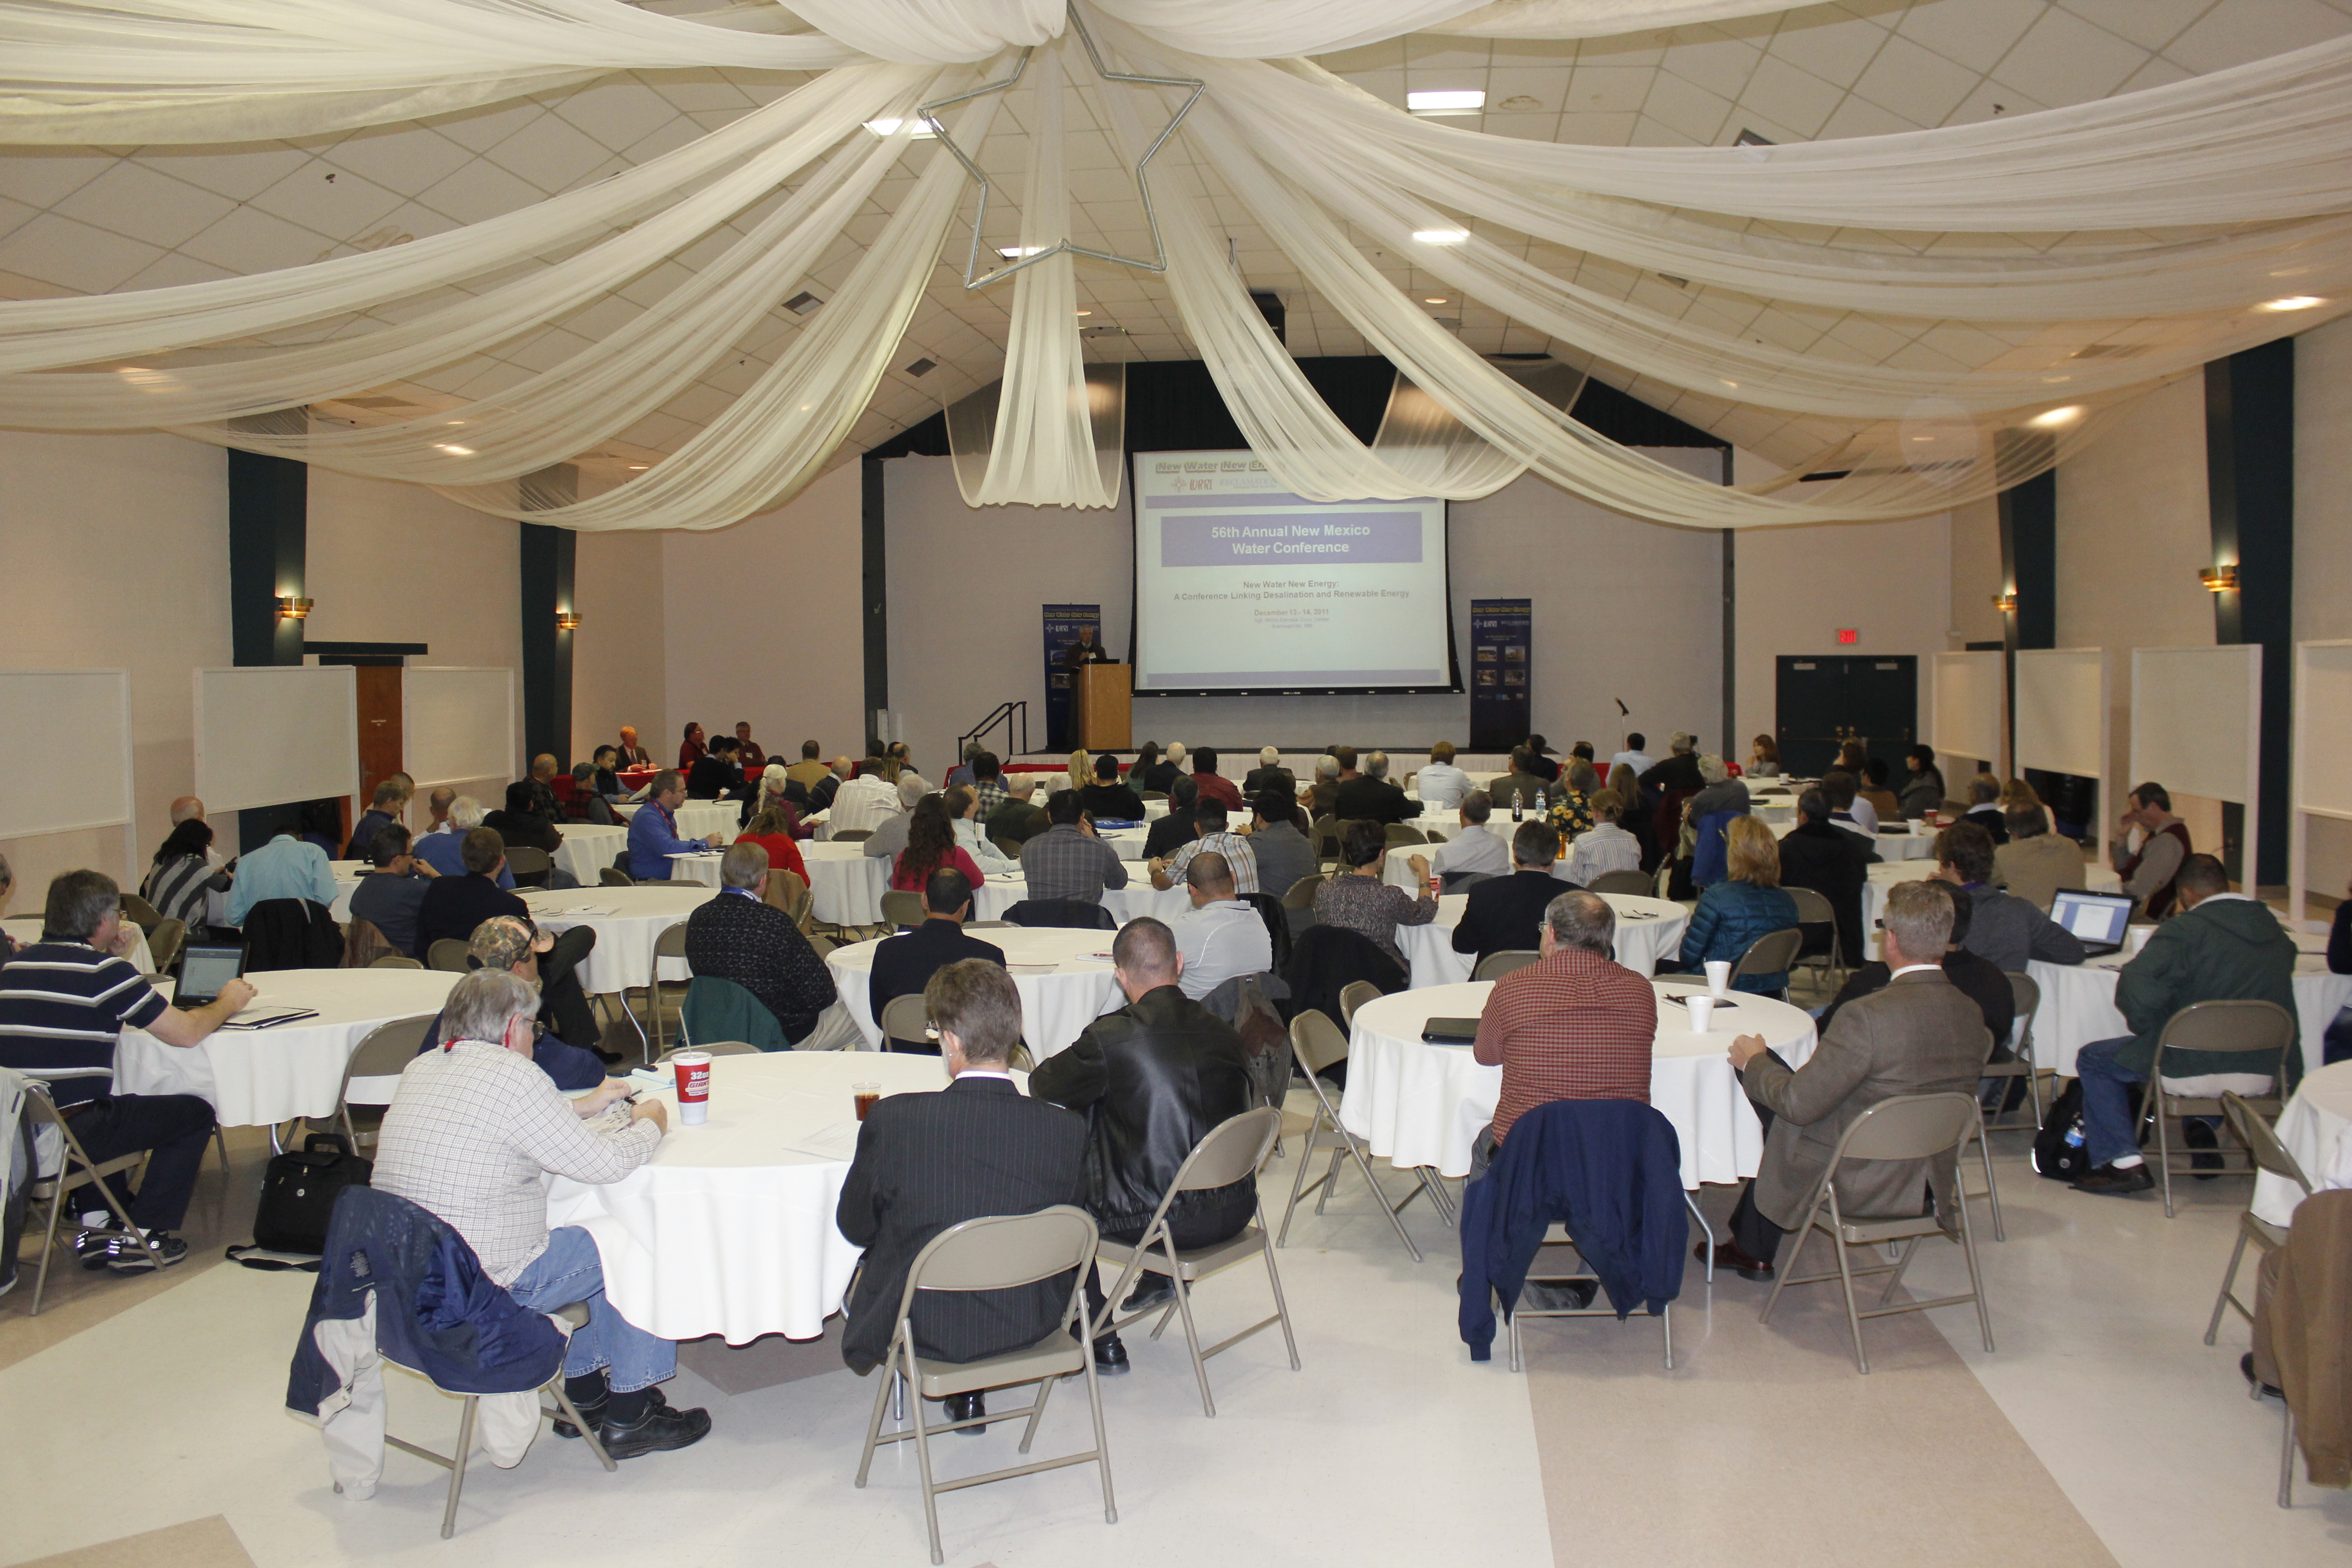 Attendees at the 56th Annual NM Water Conference on Desalination Research